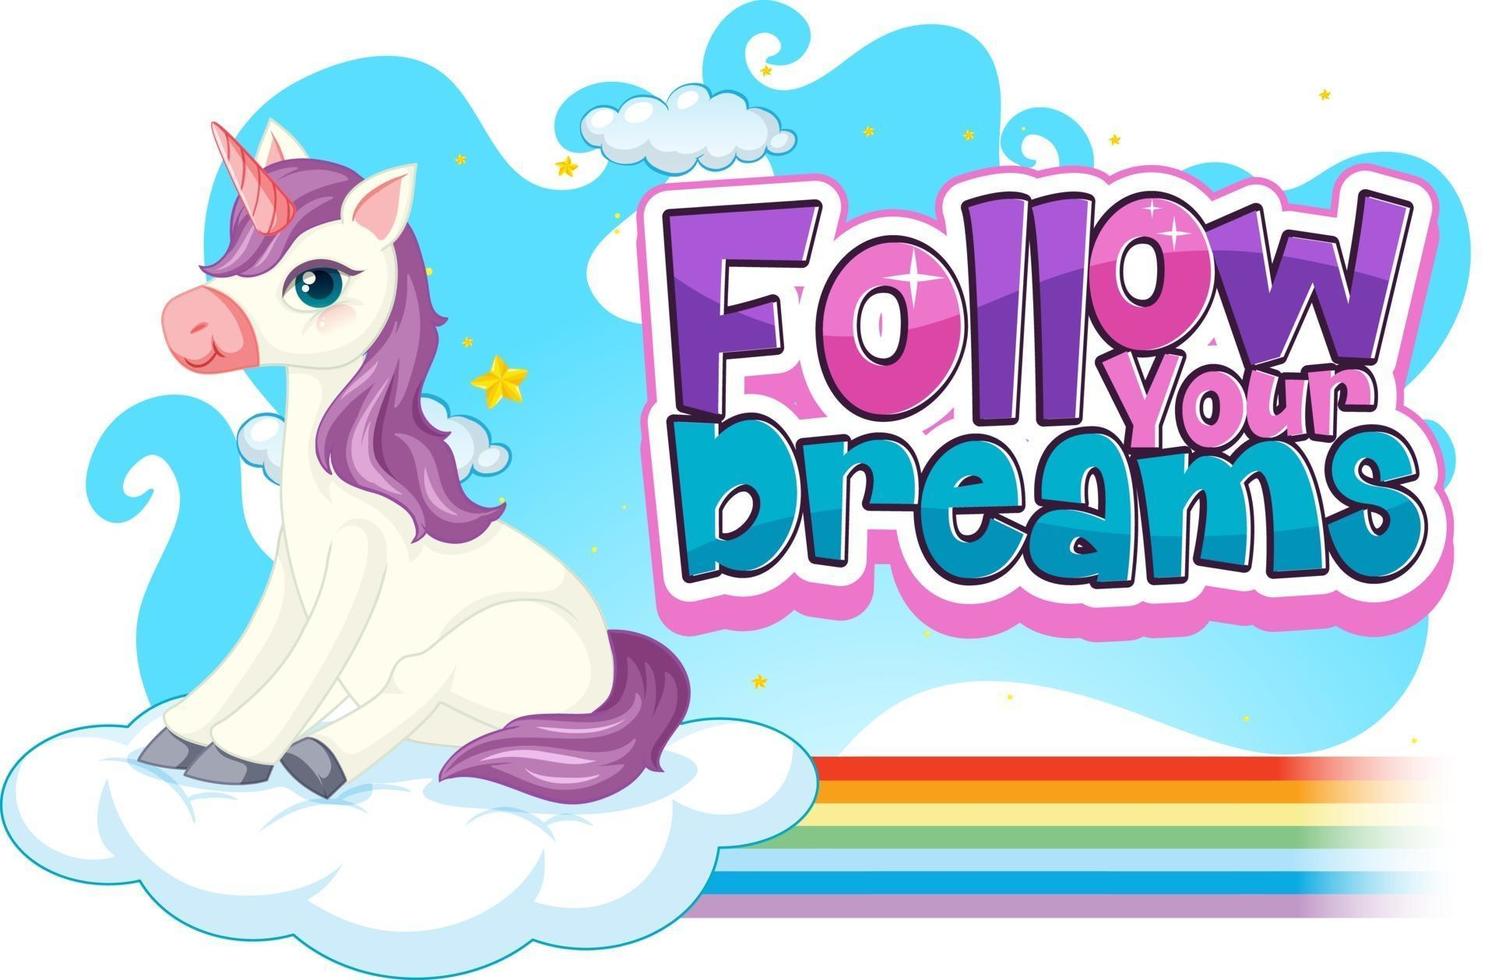 Unicorn cartoon character with Follow Your Dreams font banner vector